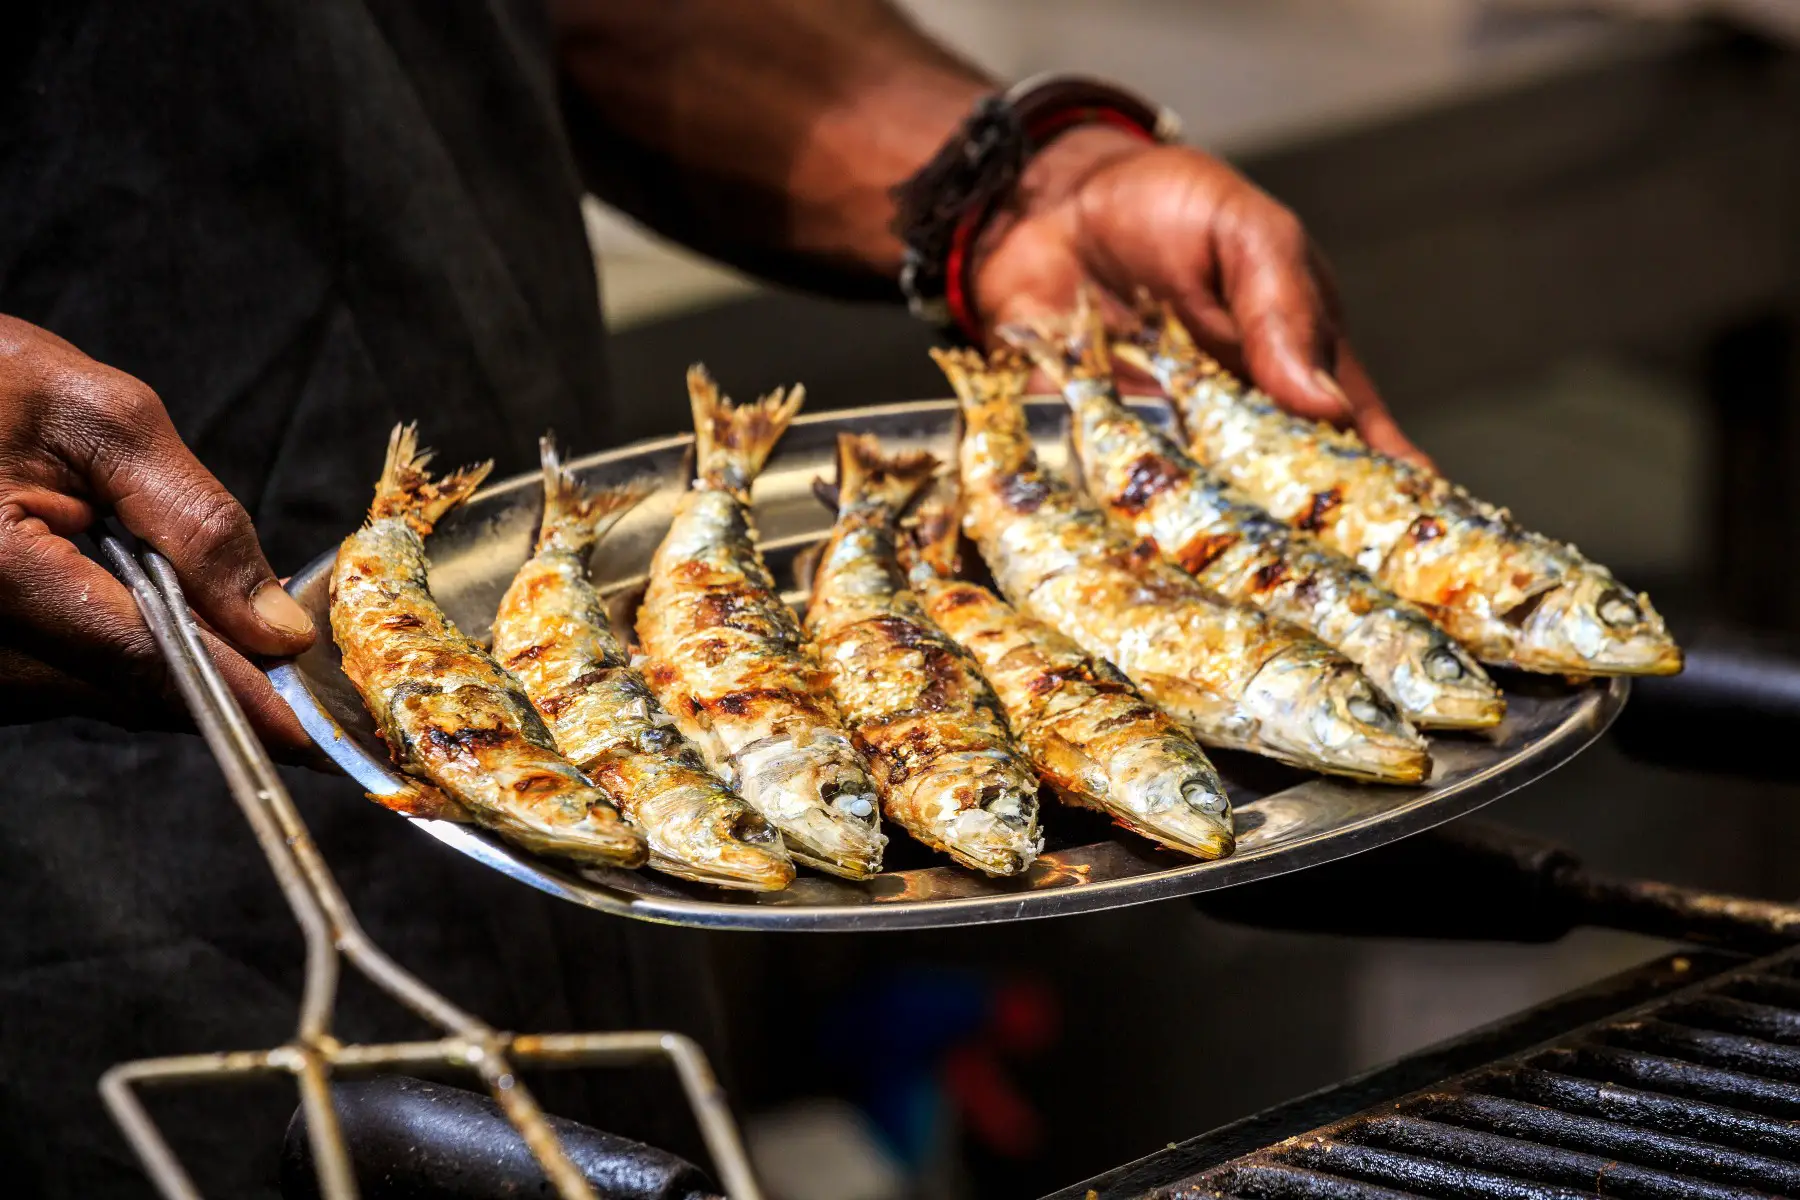 grilled fish in Portugal